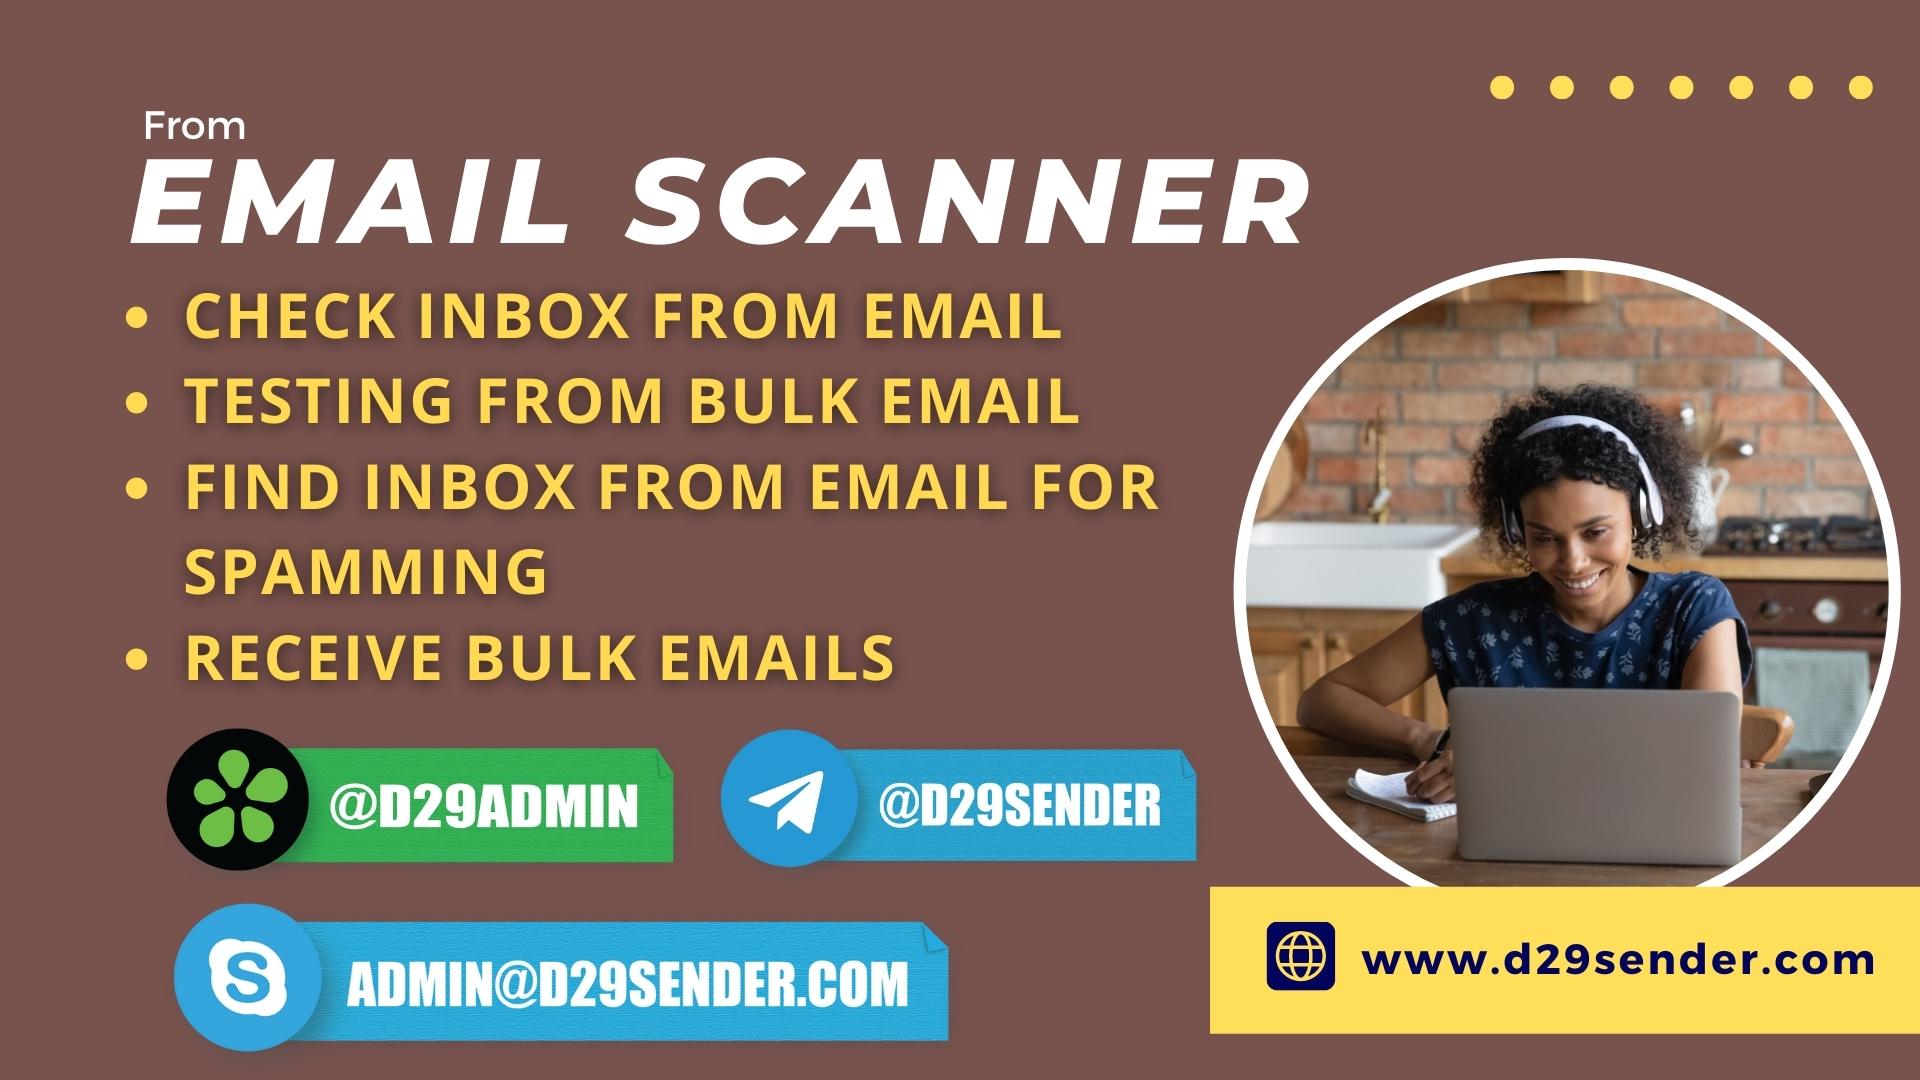 From Email Scanner [ Fetch inbox from emails]